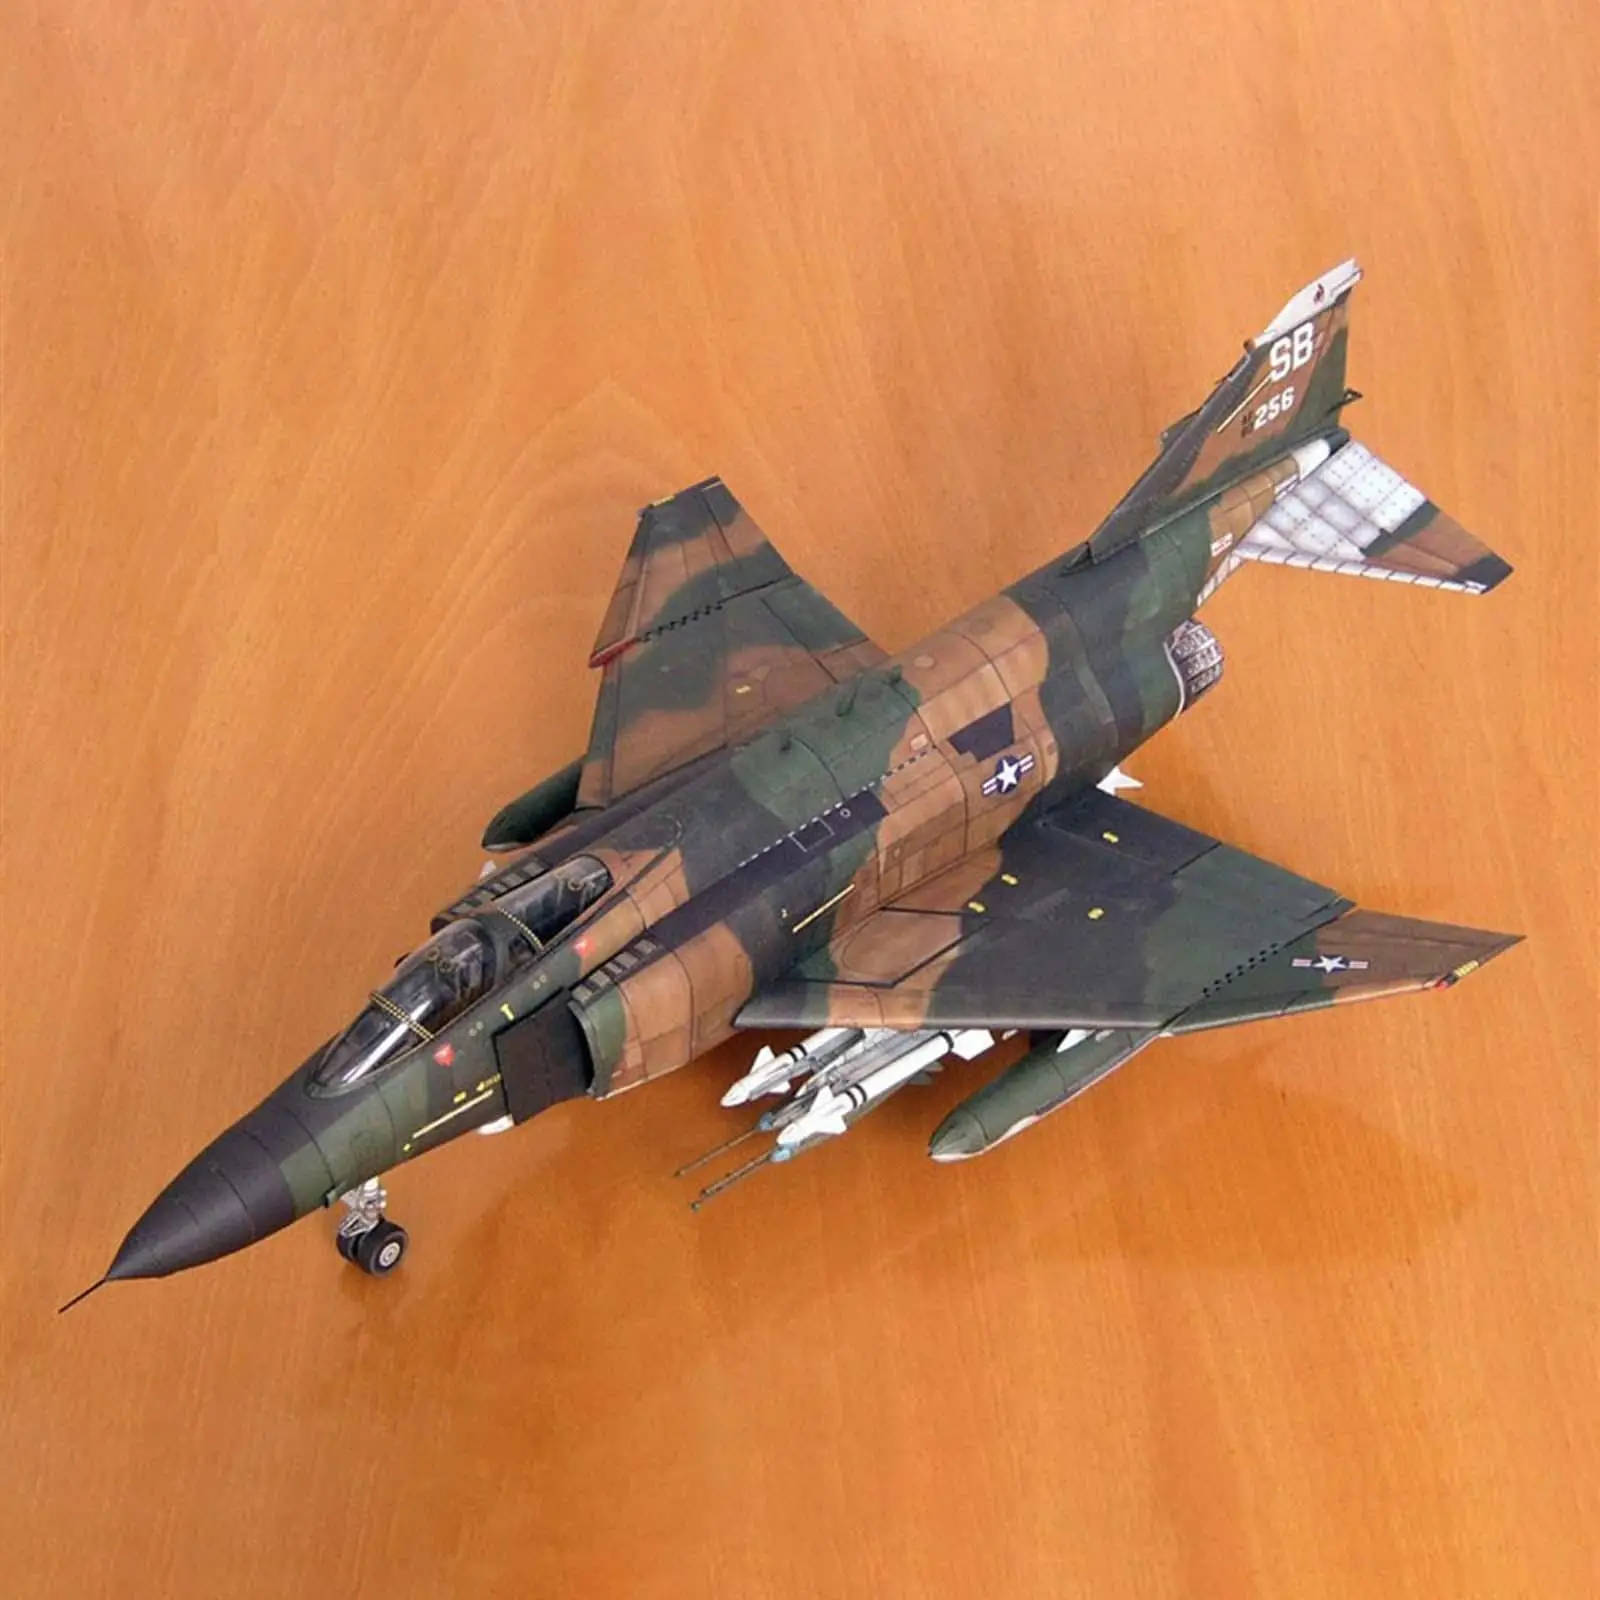 1:33 Scale American Plane Model Puzzle Toy DIY F-4B Display Ornaments Fighter Model for Desktop Office Table Collectibles Gift